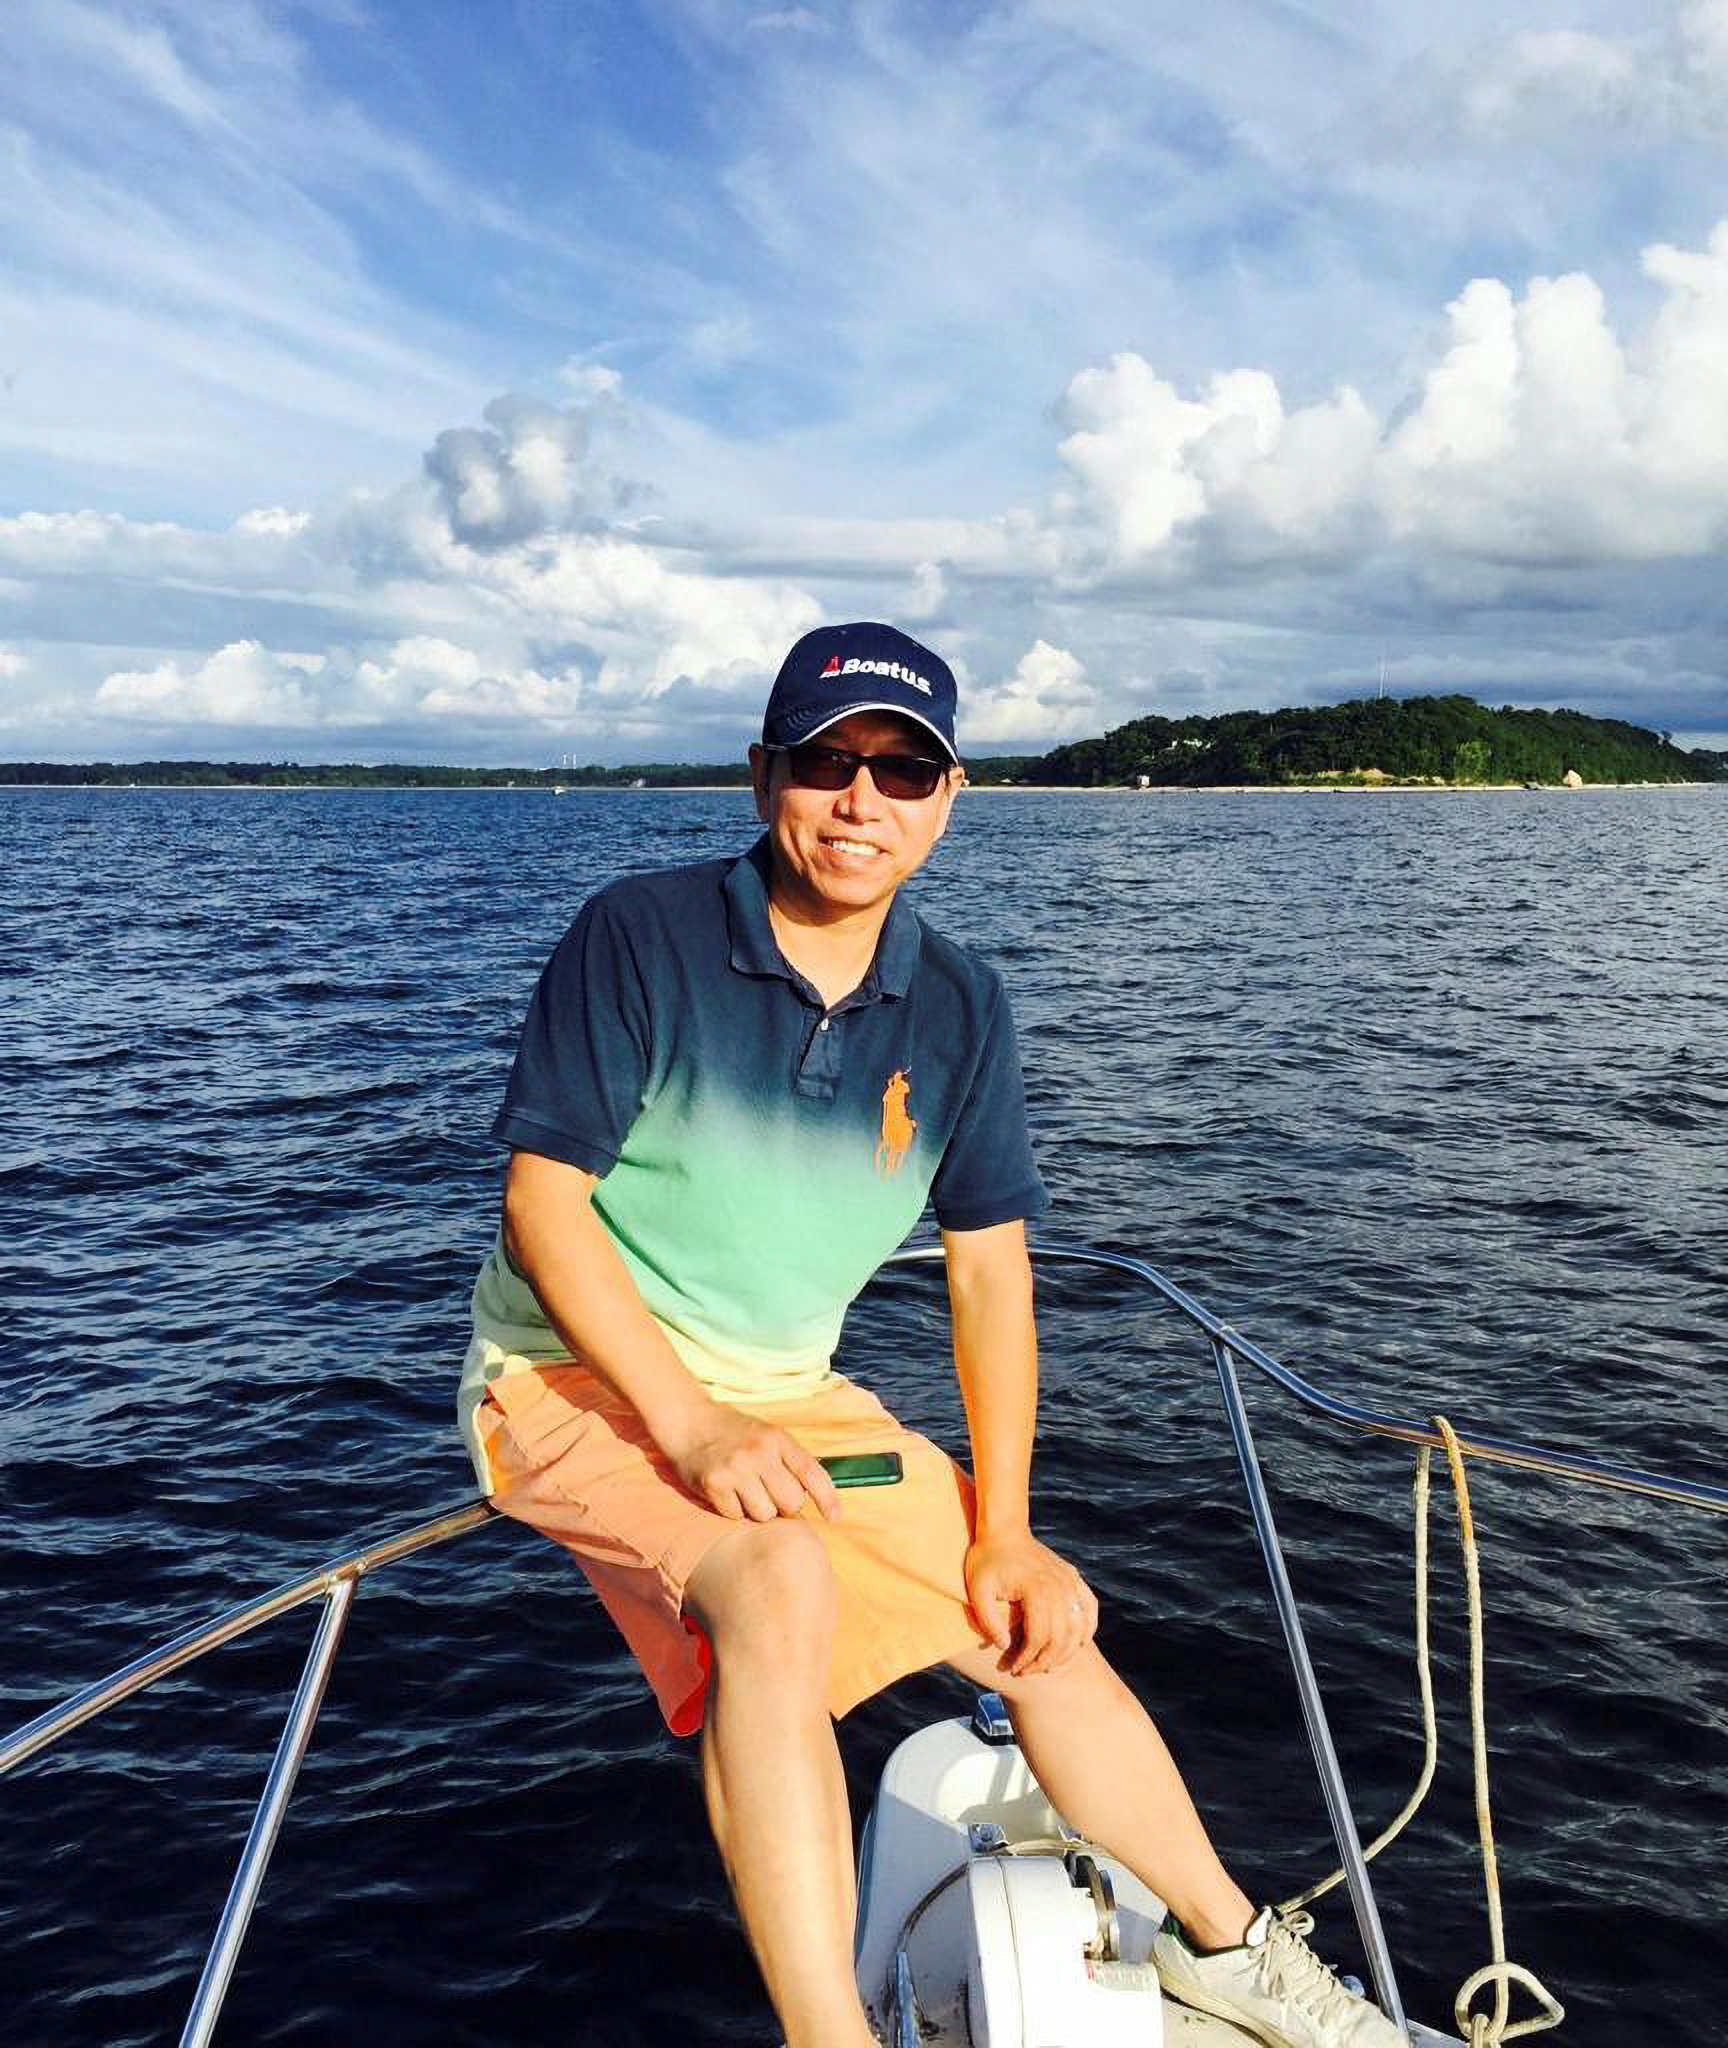 Chinese-American citizen Kai Li, who has been detained in China since 2016, poses for a picture while fishing on the Long Island Sound